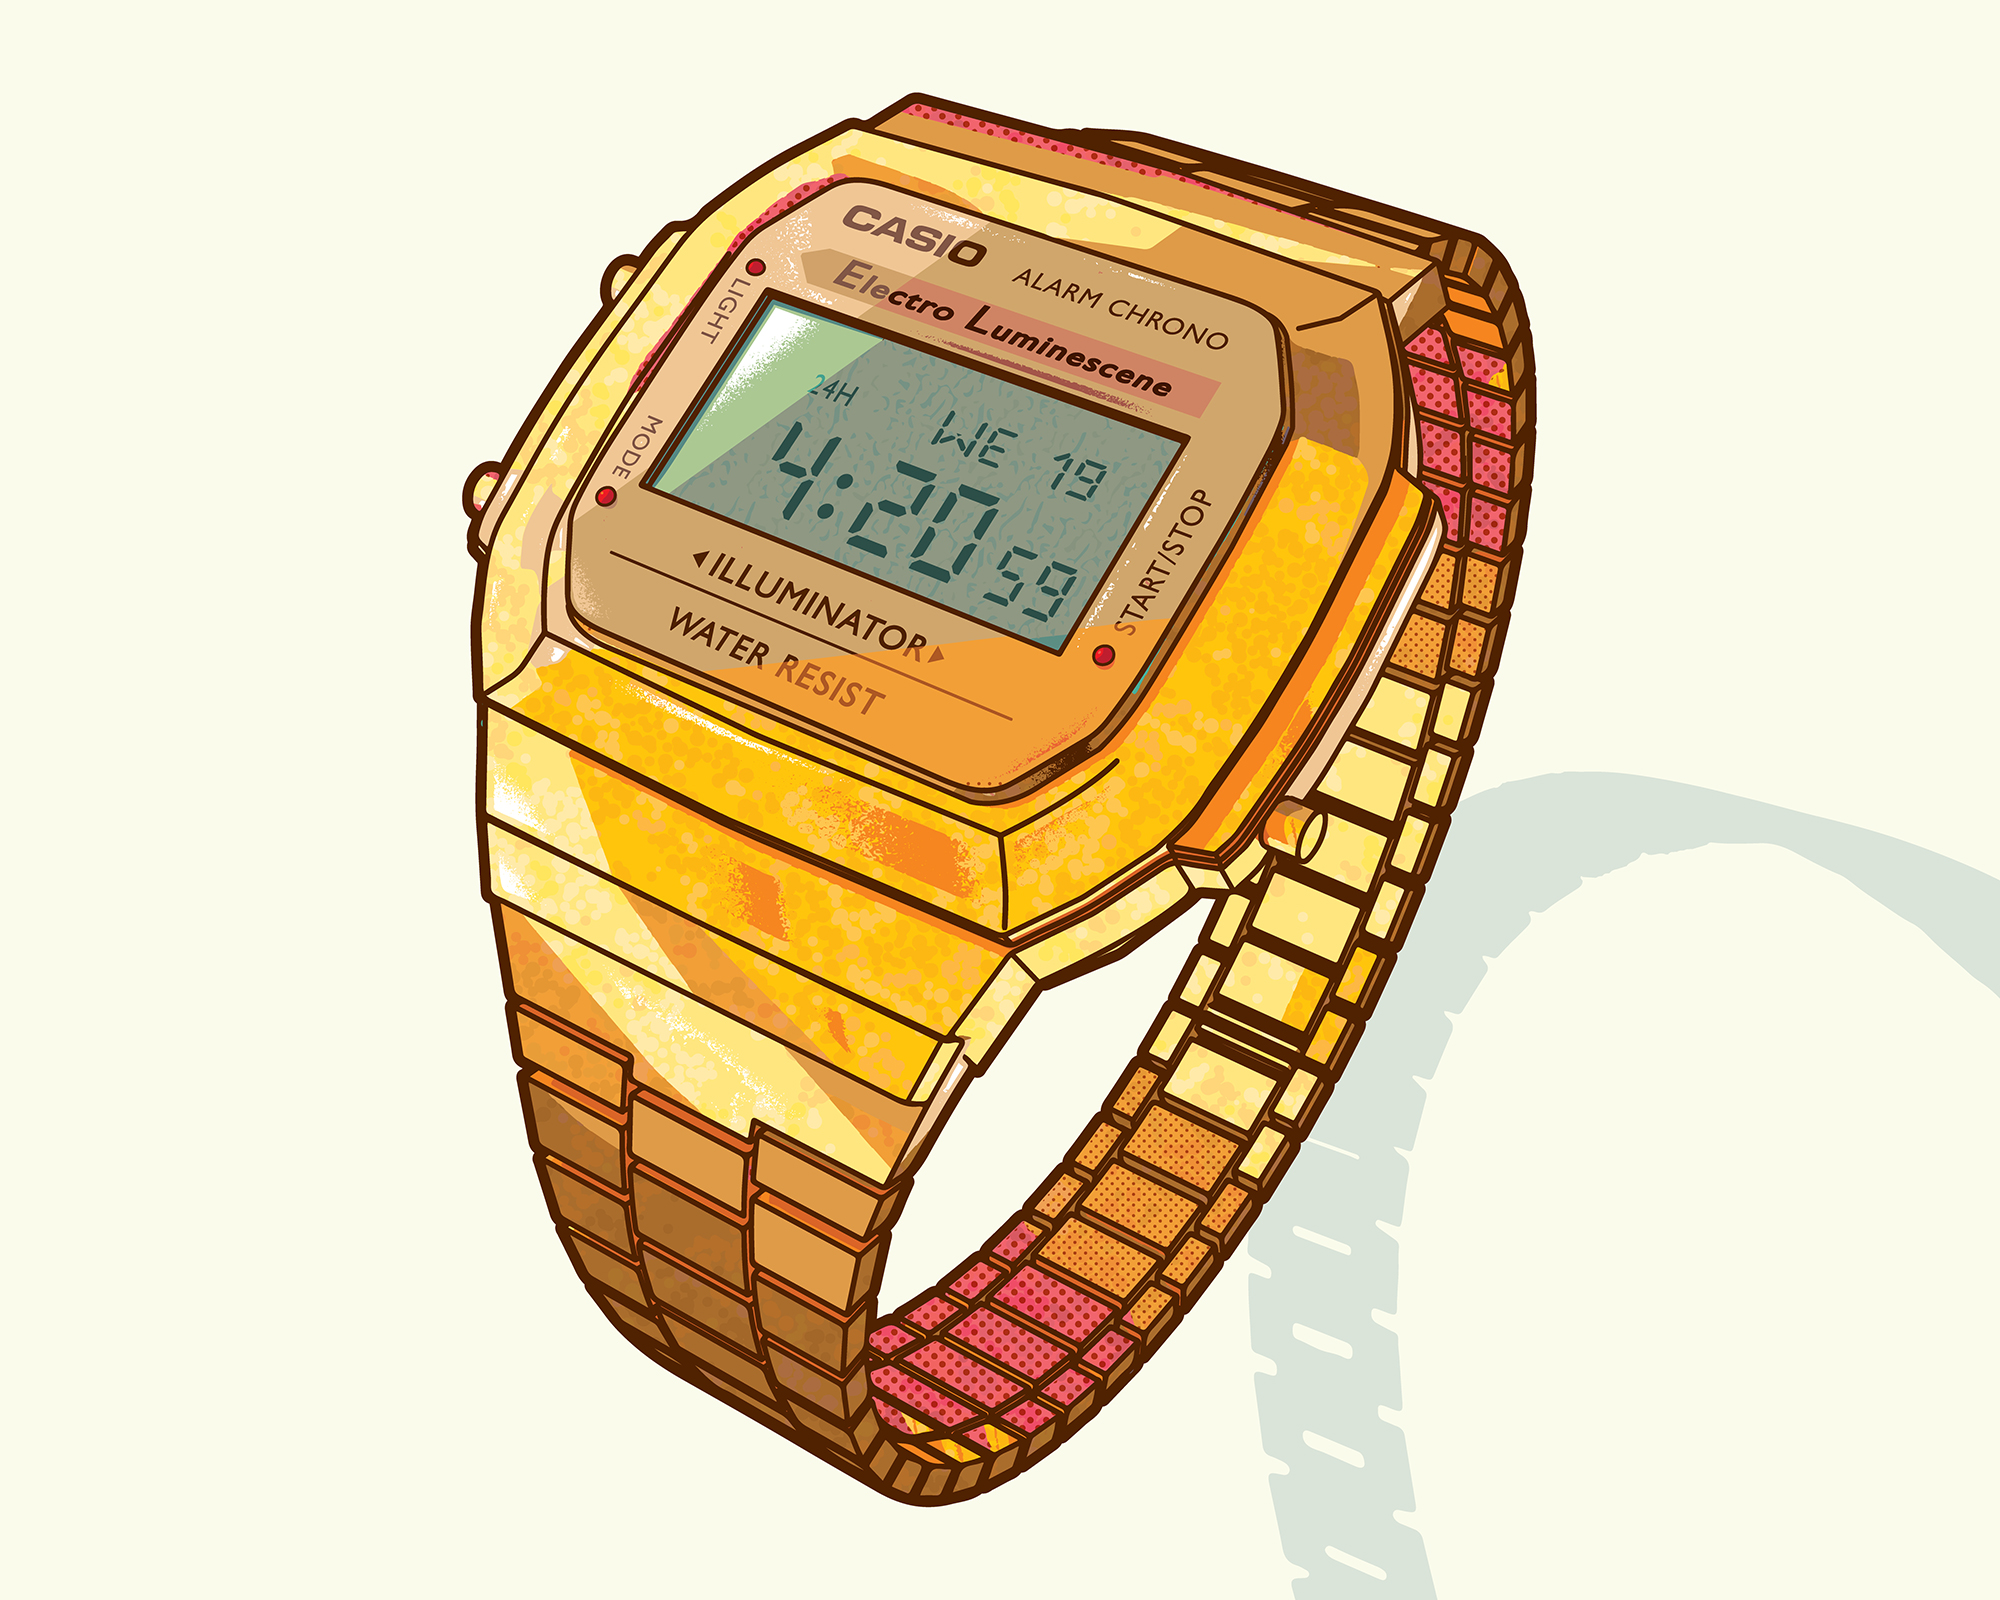 Casio Watch From The 90s By Bert Musketon